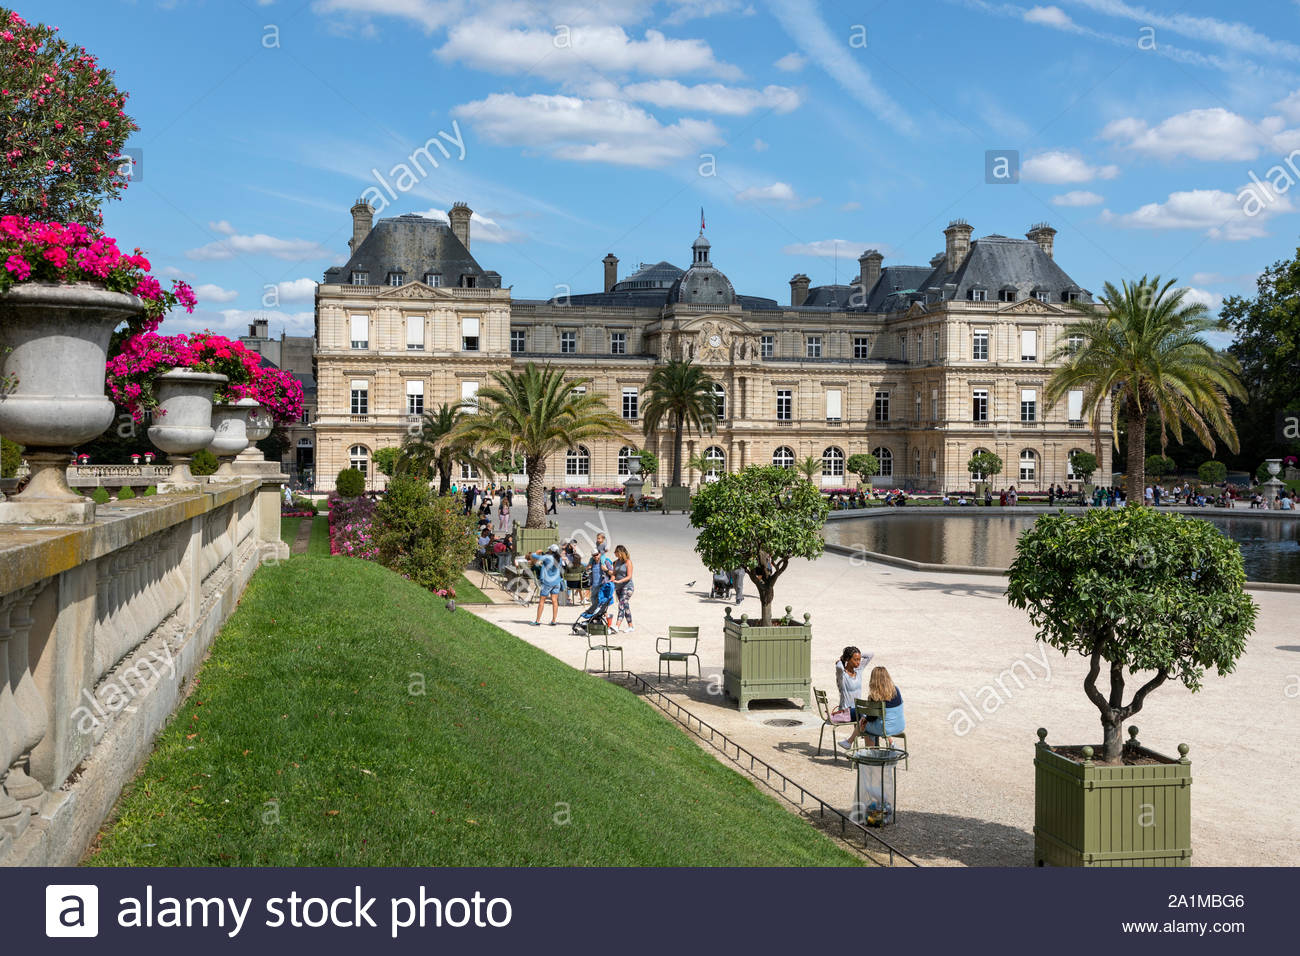 luxembourg palace in the jardin du luxembourg also known in english as the luxembourg gardens paris france 2A1MBG6